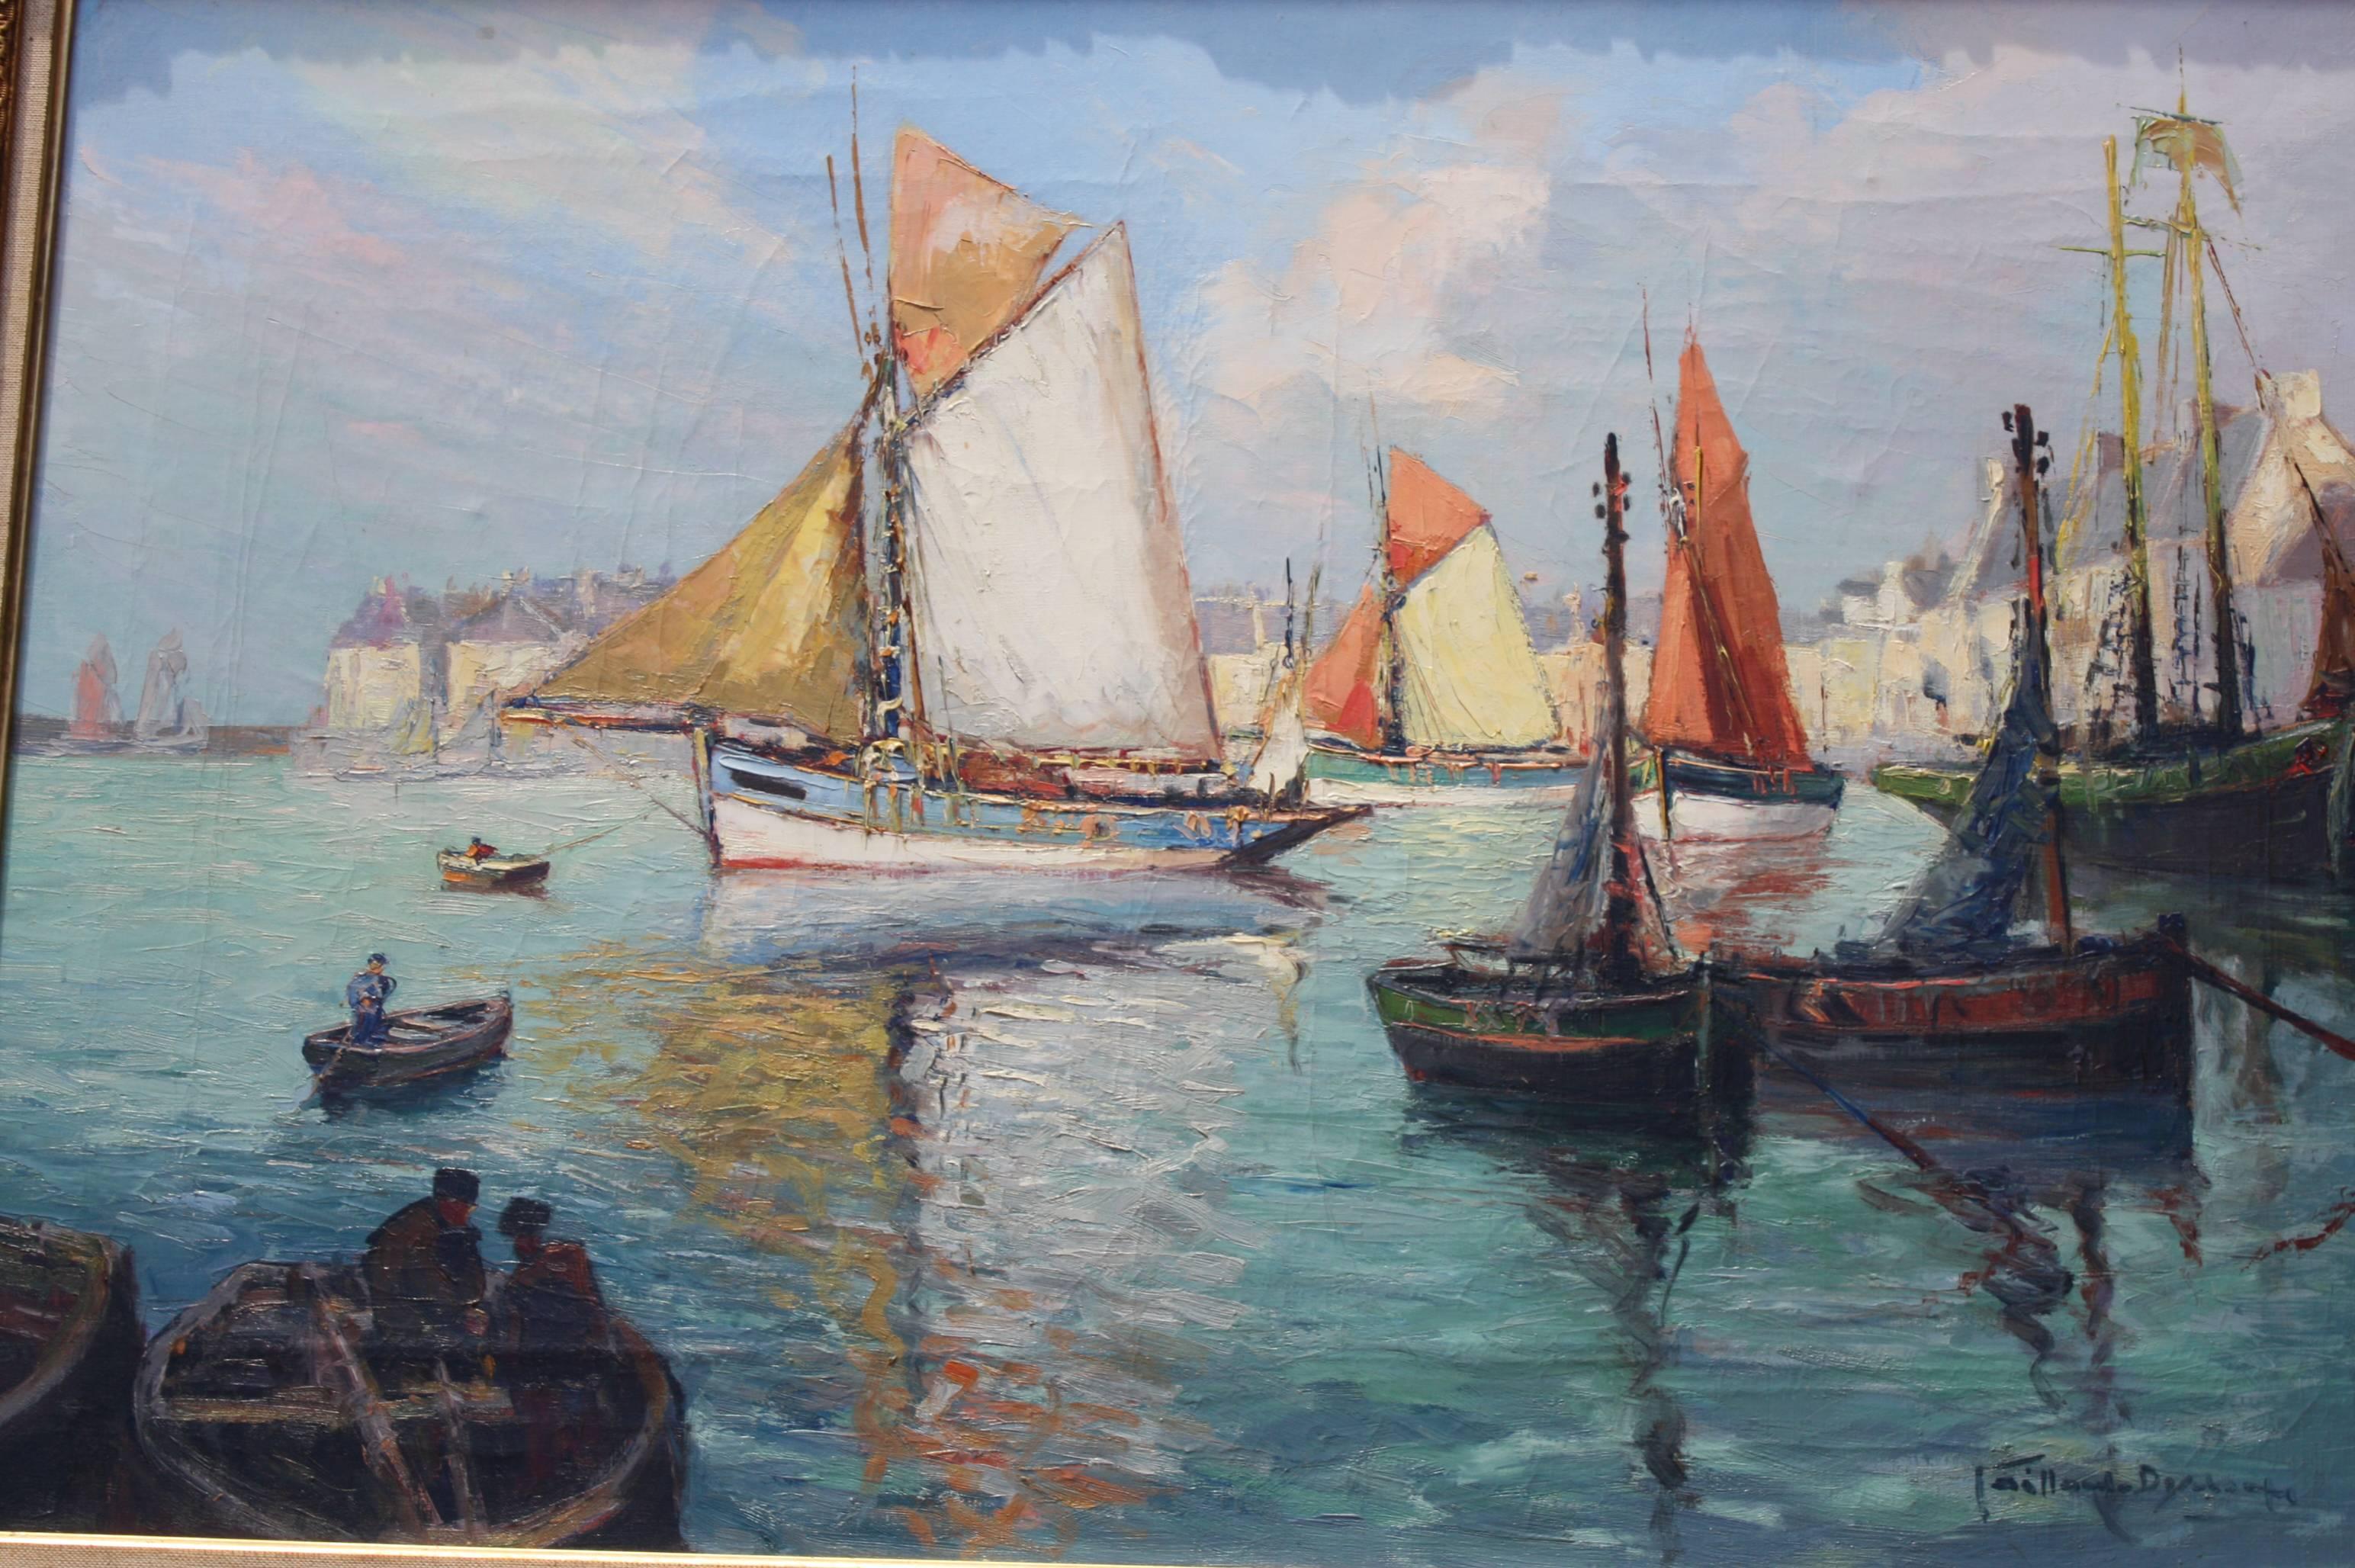 Canvas French Impressionist Painting, Subject 'Boats on the Sea'